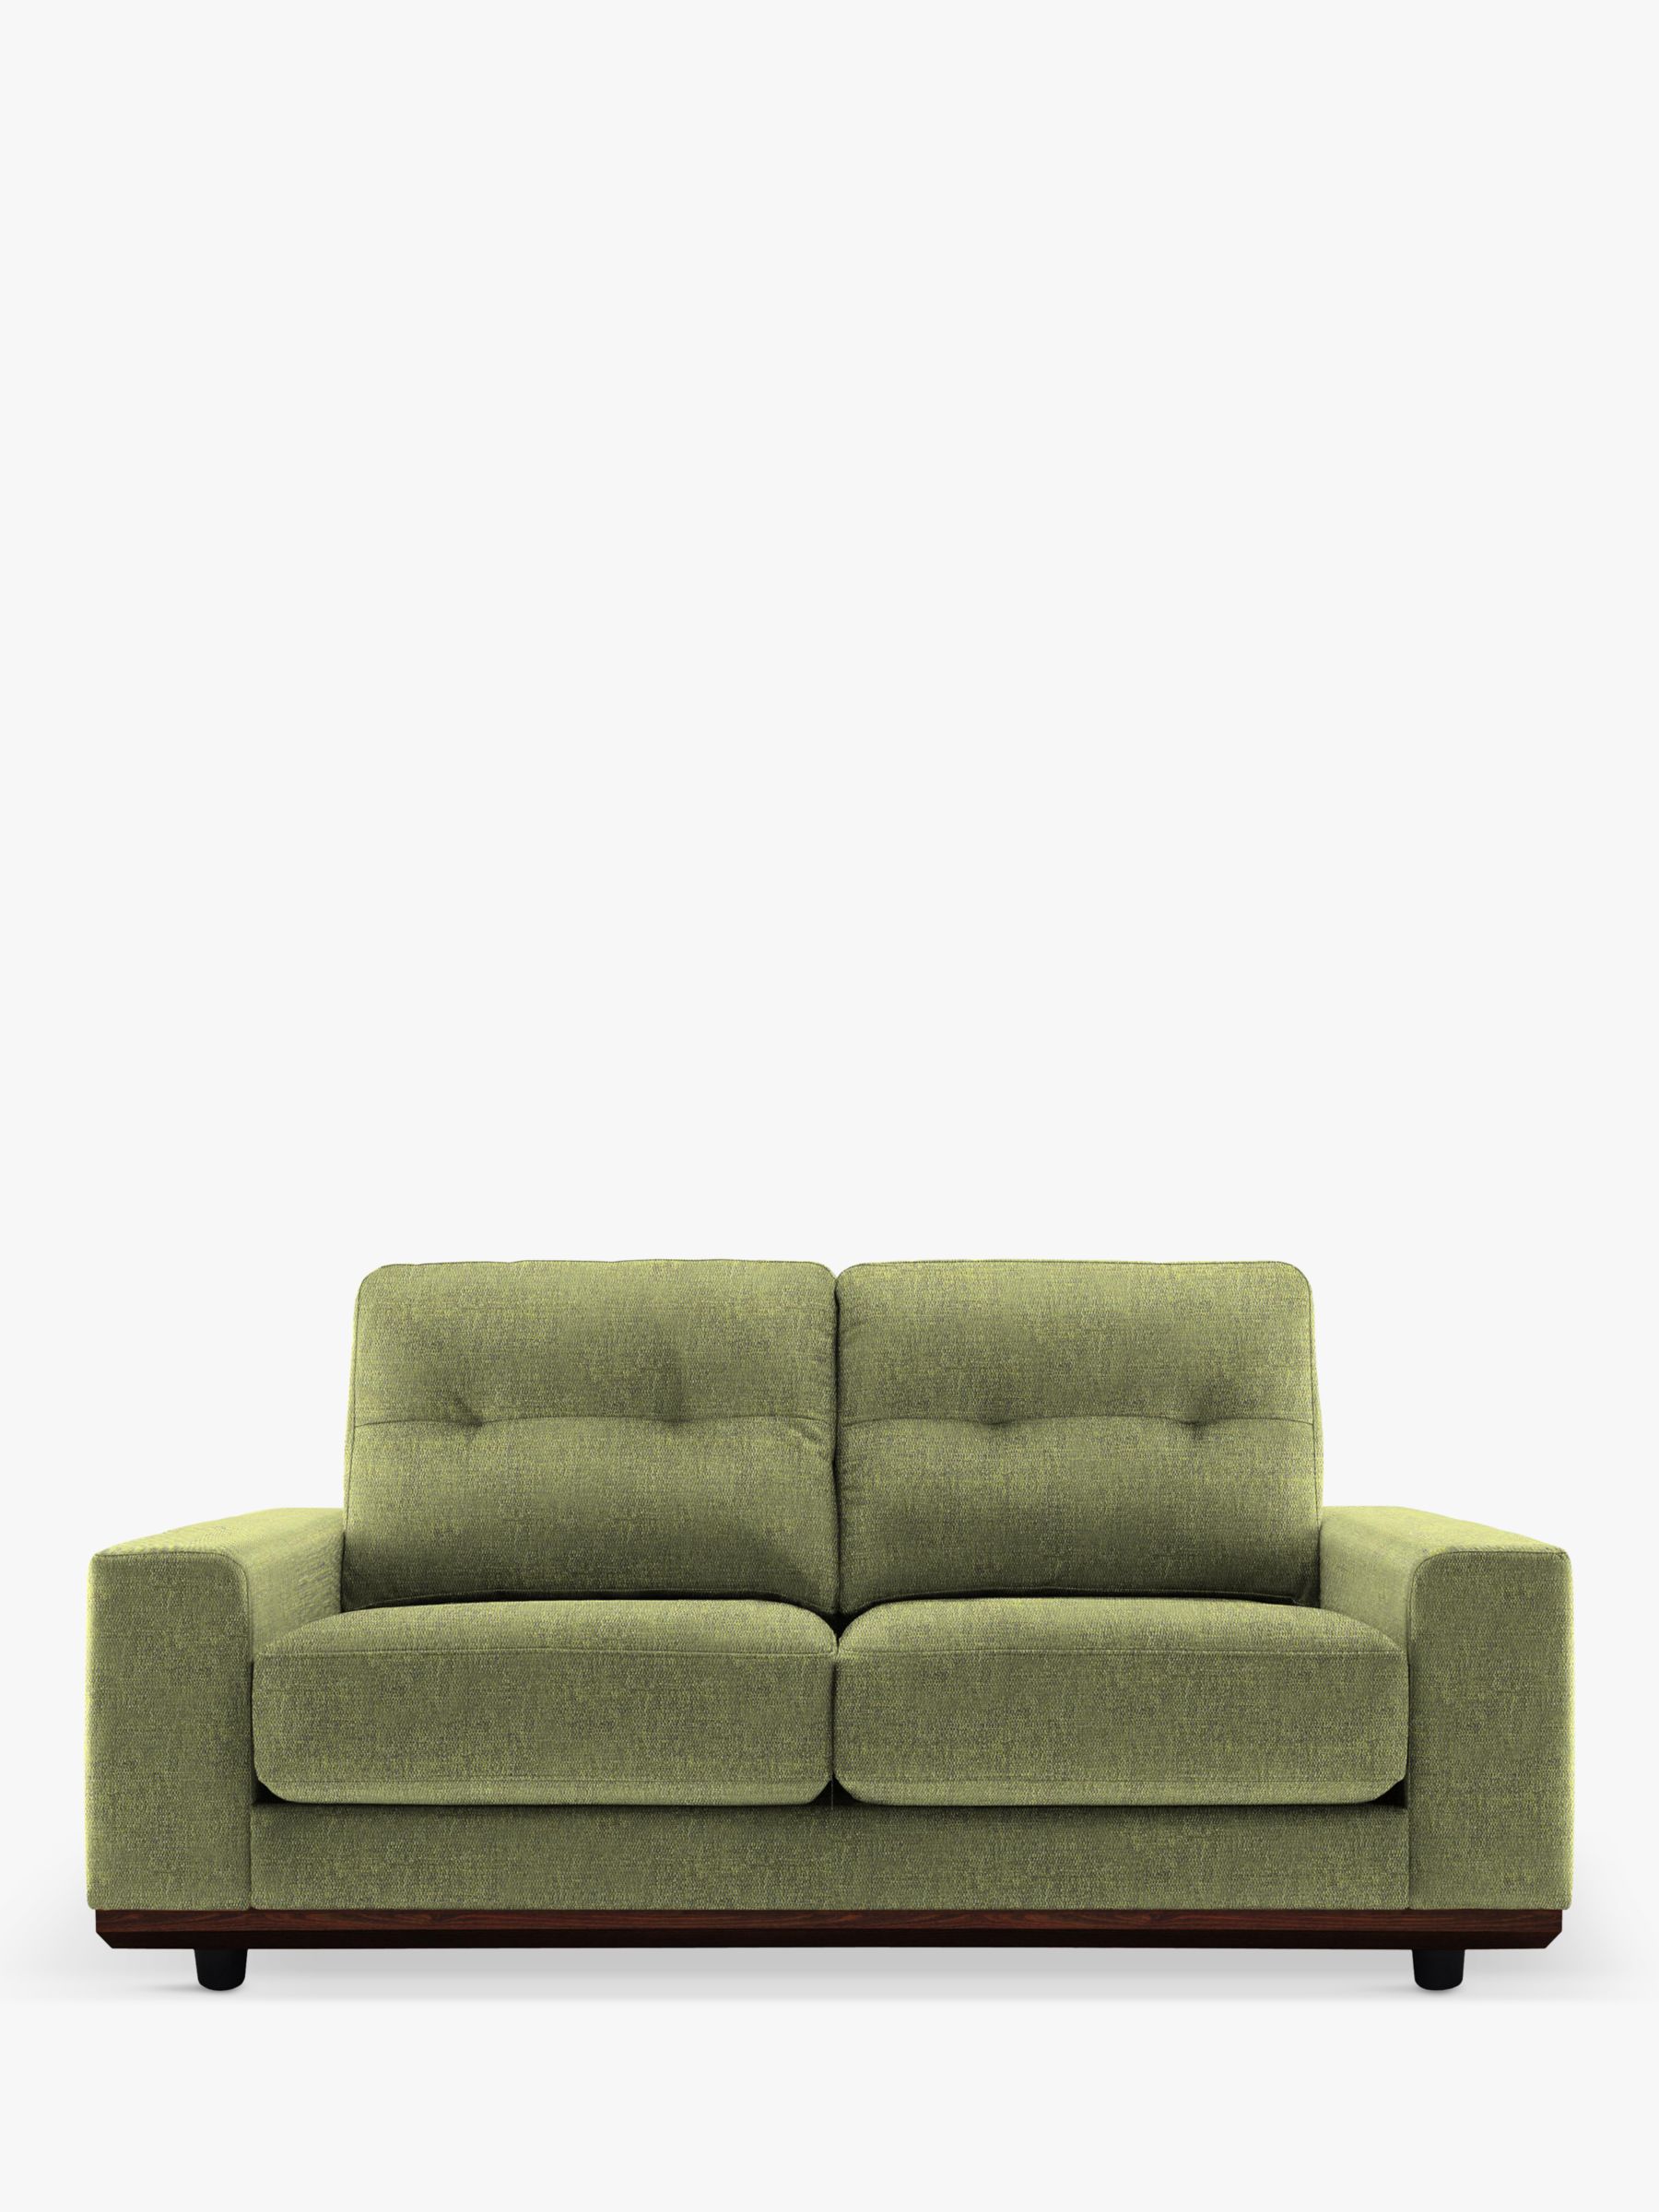 The Seventy One Range, G Plan Vintage The Seventy One Small 2 Seater Sofa, Marl Green